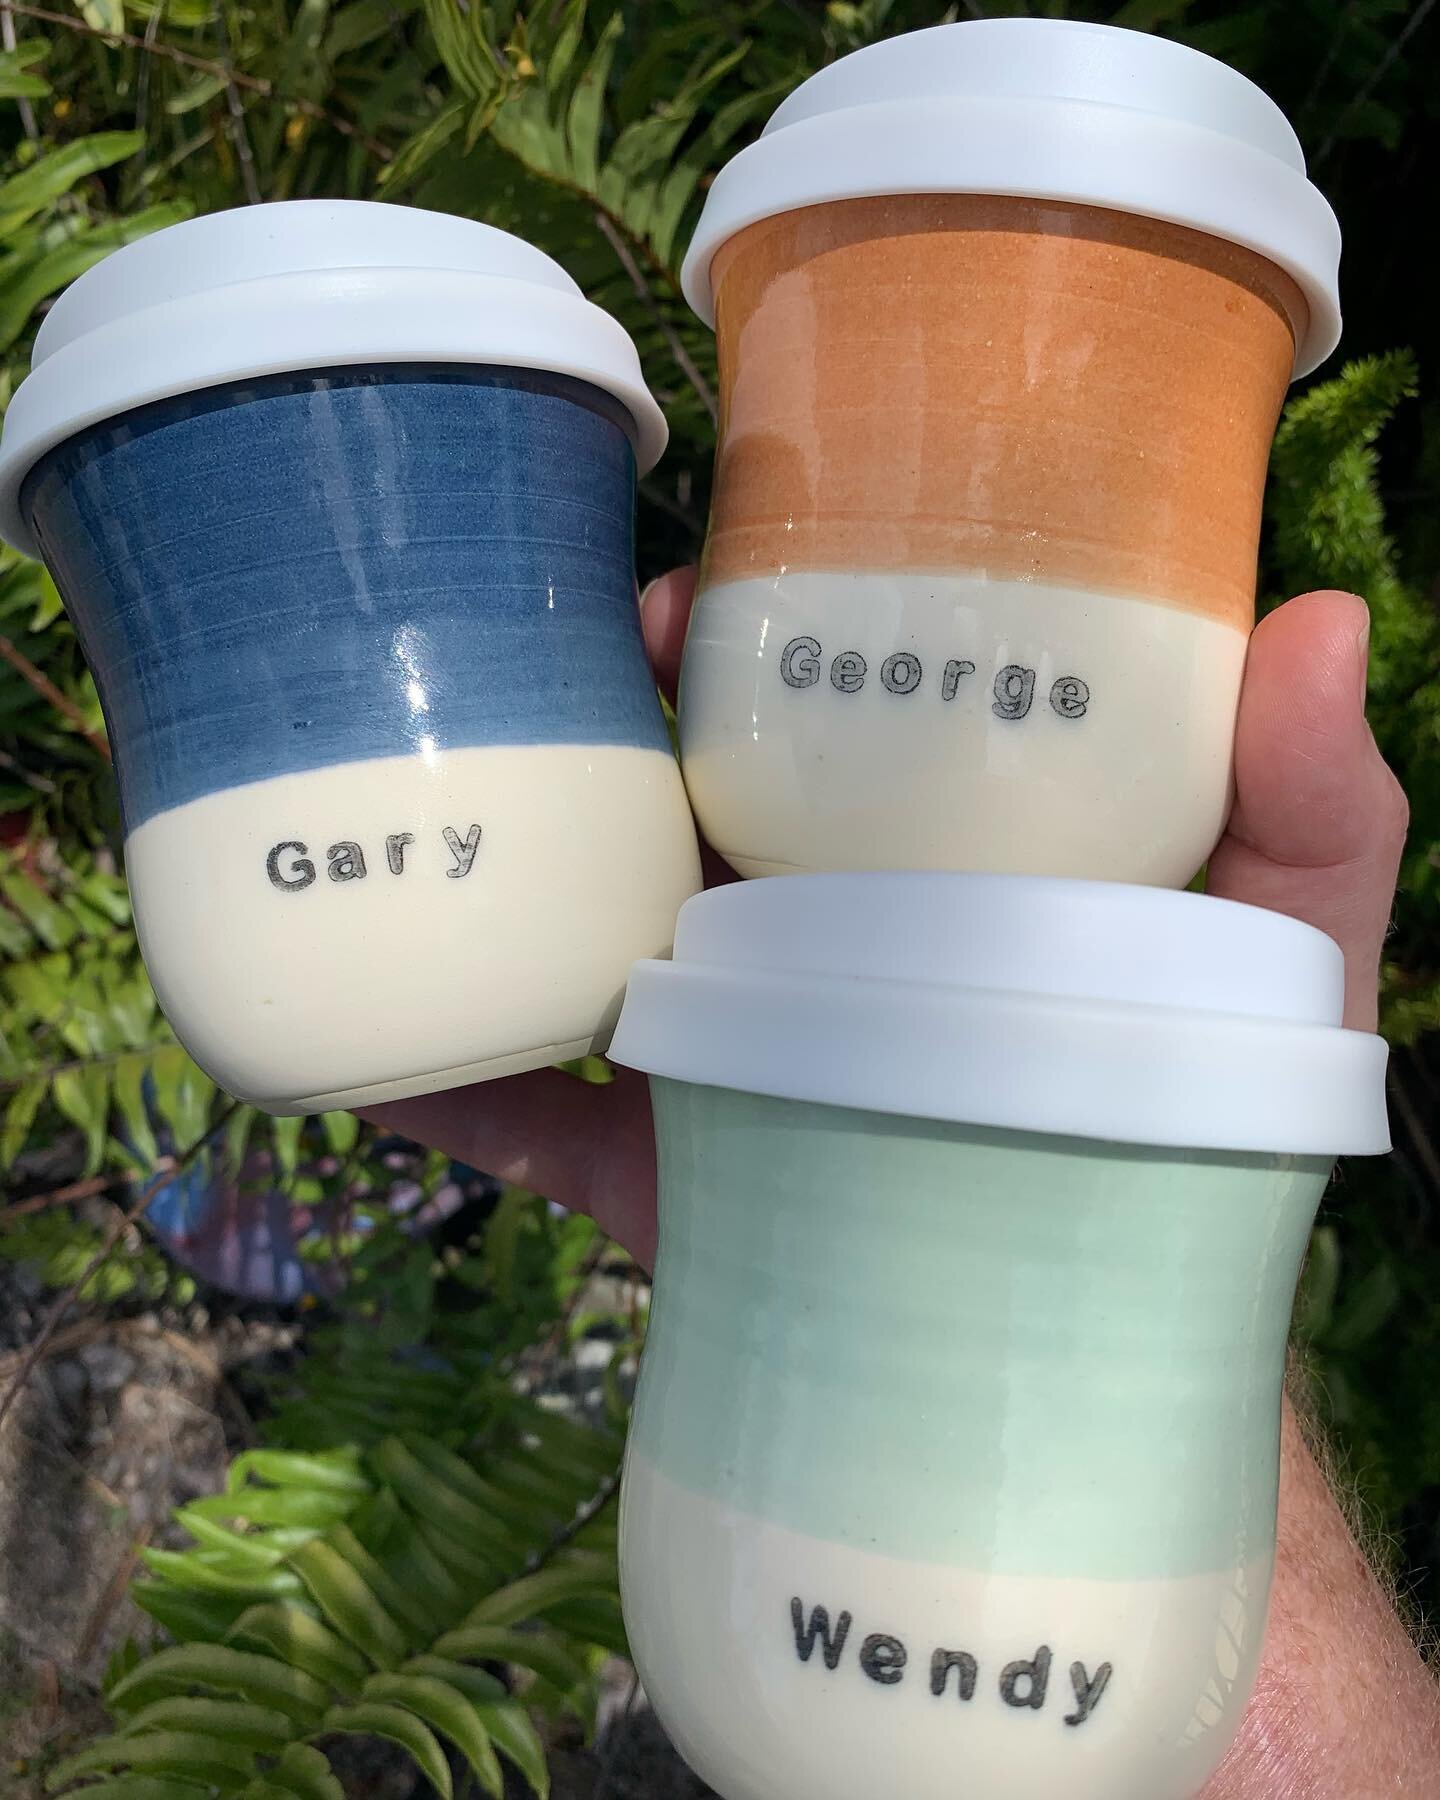 So many personalised cups! Makes a great original gift for family and friends and we have pre made stock so we can deliver in a shorter time period for Chrissy this year! #theceramicmill #keepcup #travelcup #handmade #greenteam #sustainable #customtr